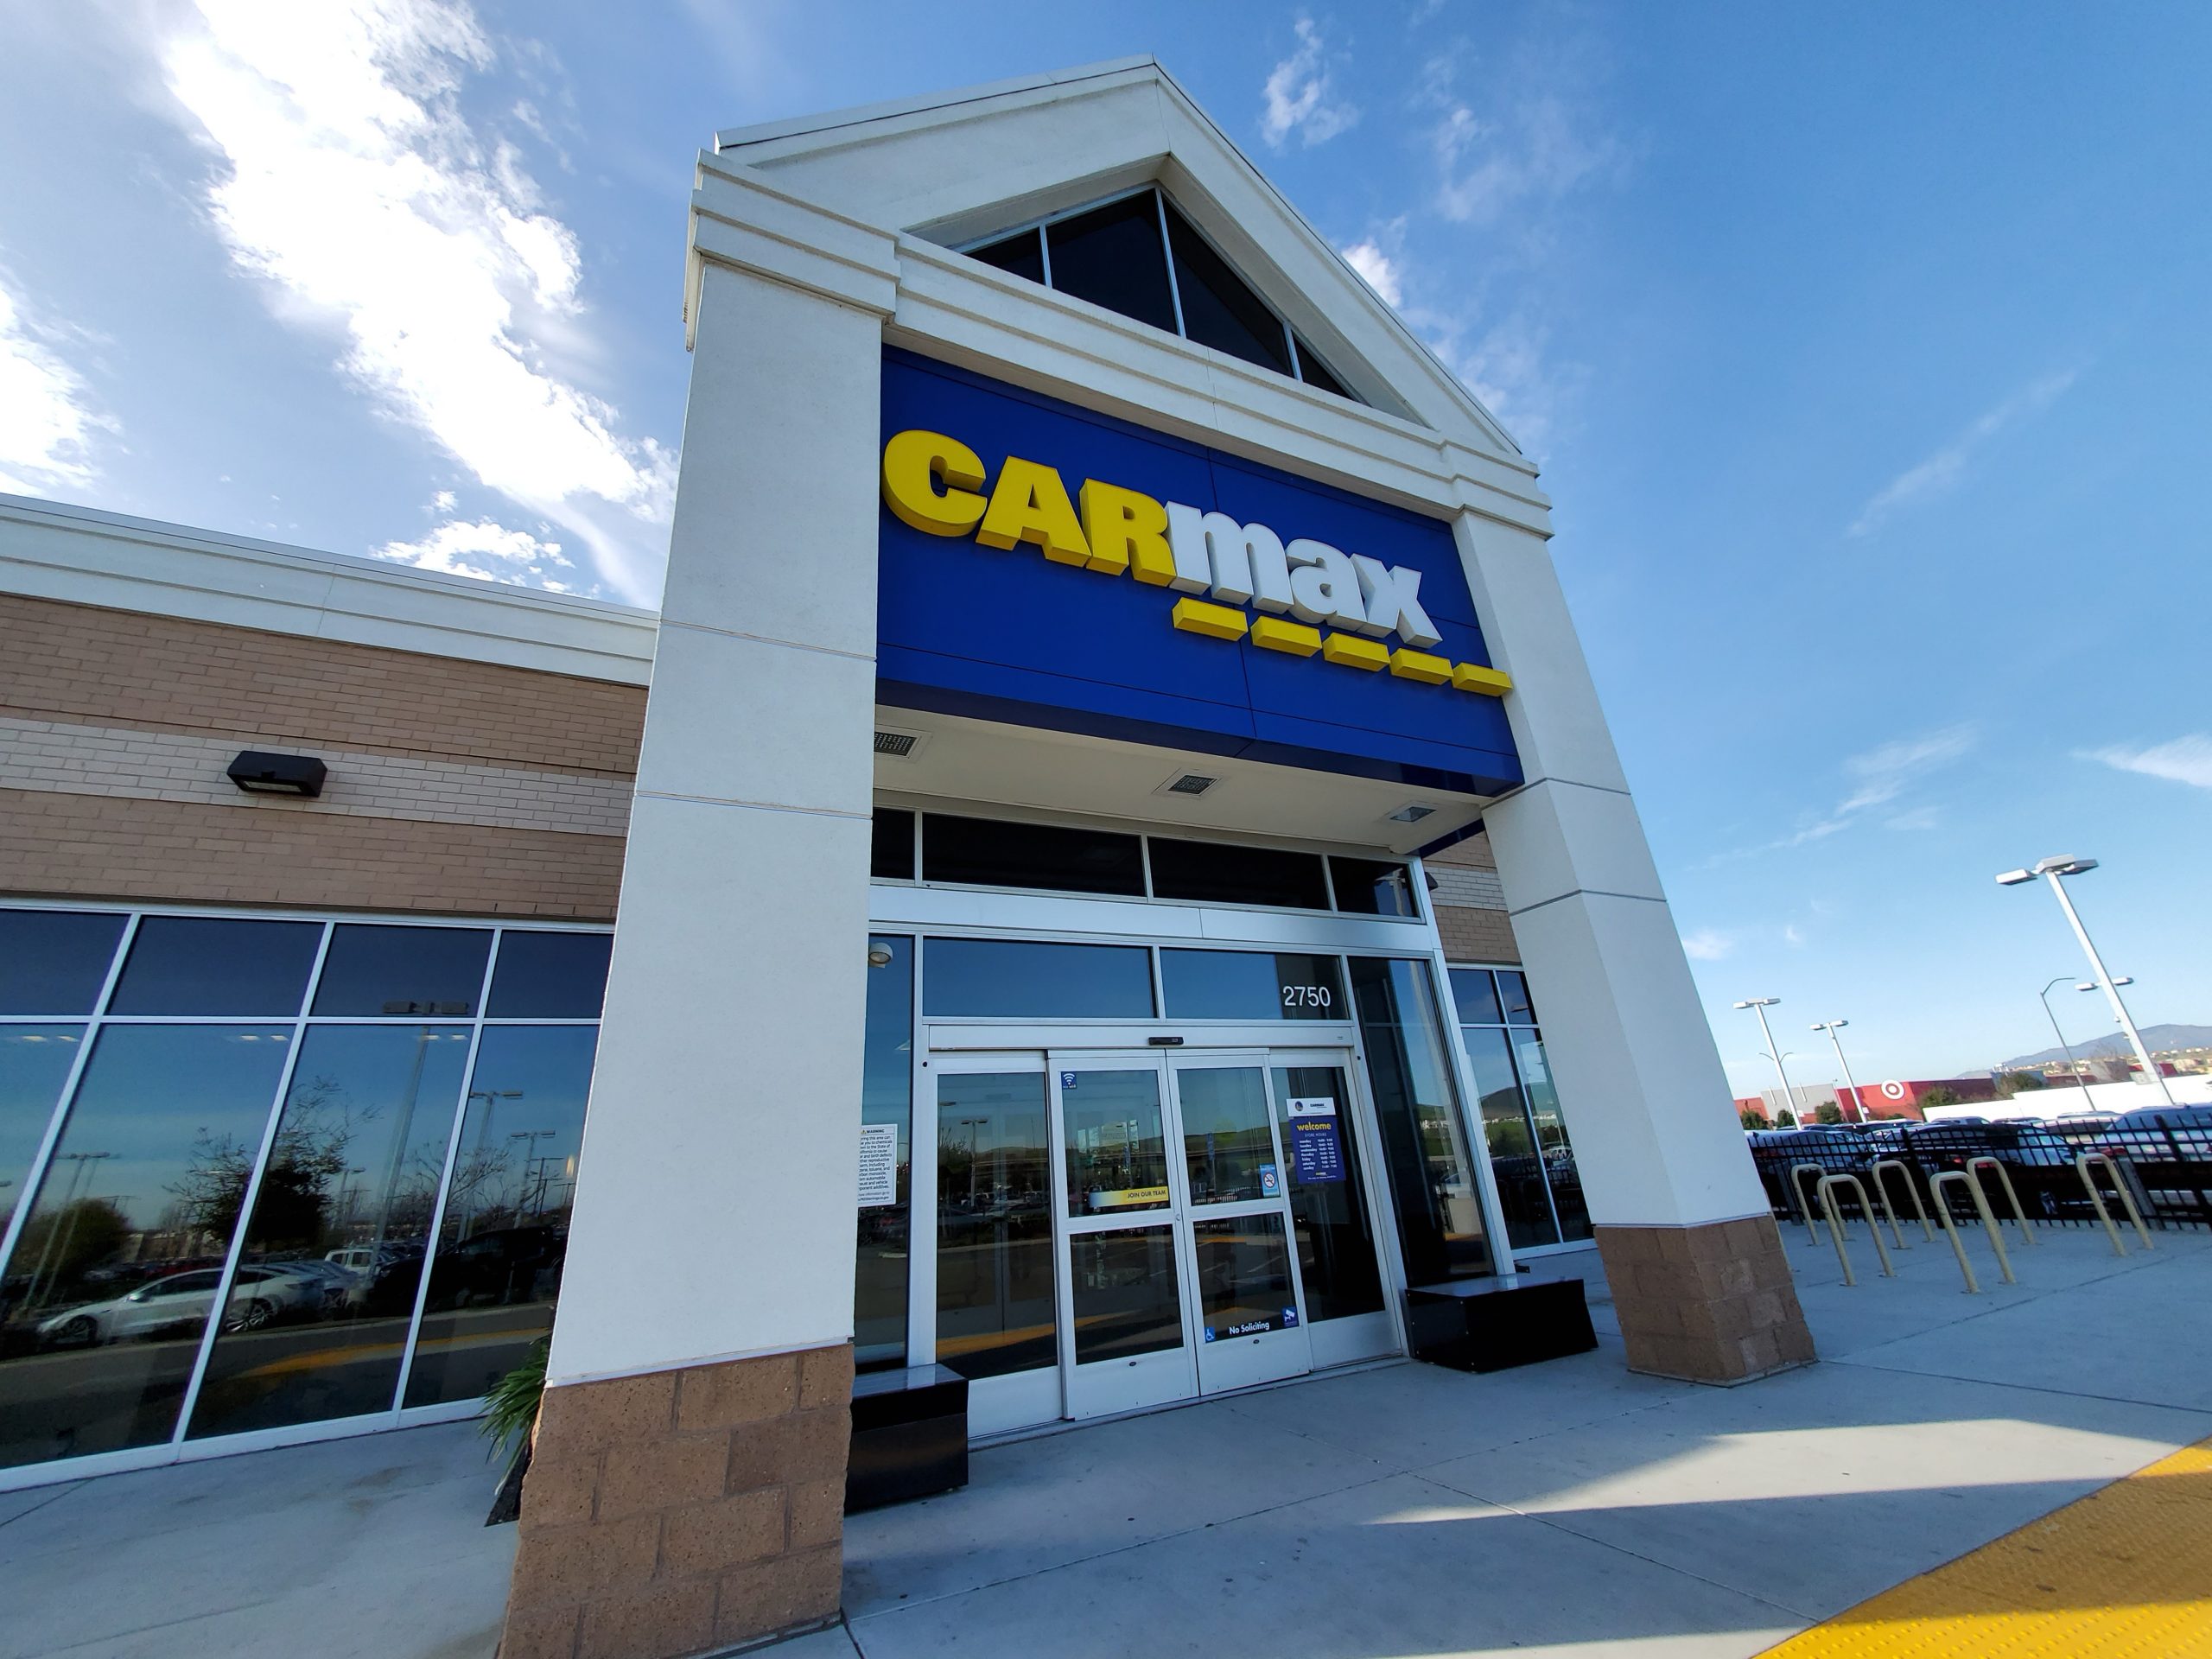 The front of a CarMax dealership